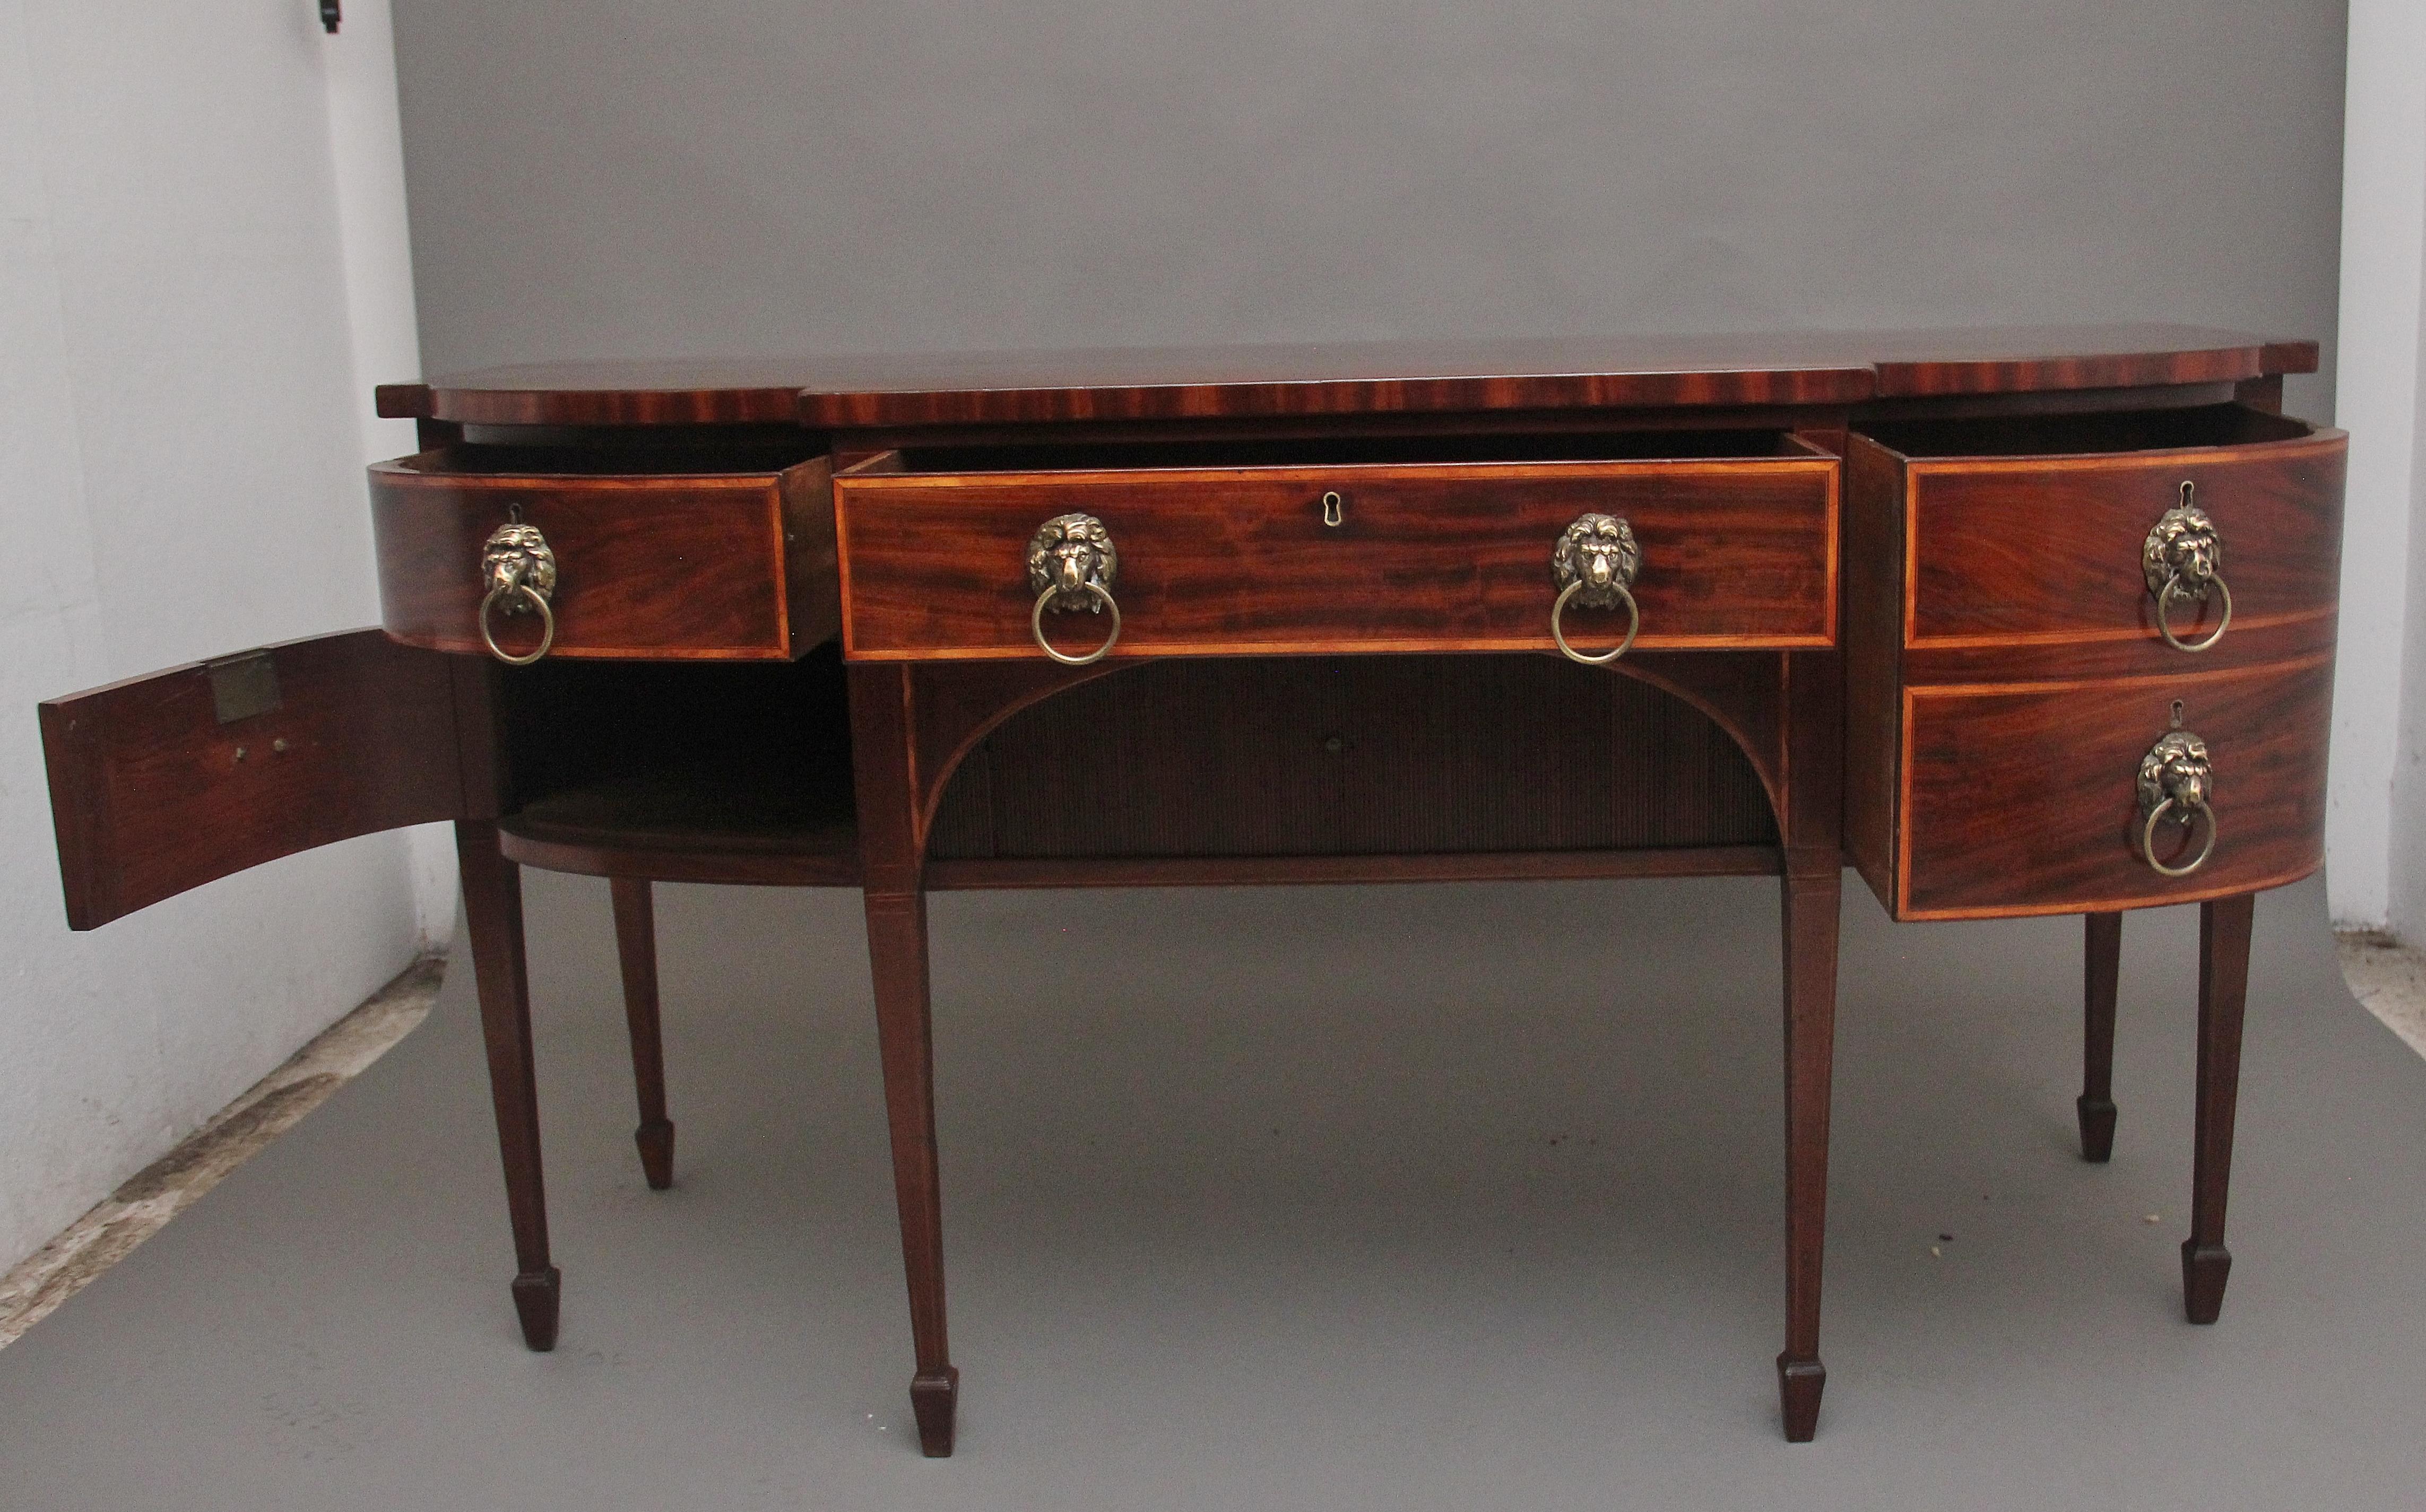 A superb quality early 19th Century mahogany inlaid bowfront sideboard, having a lovely figured top above a central drawer flanked either side with a single deep drawer to the right and a drawer to the left with a cupboard below, all drawers are oak